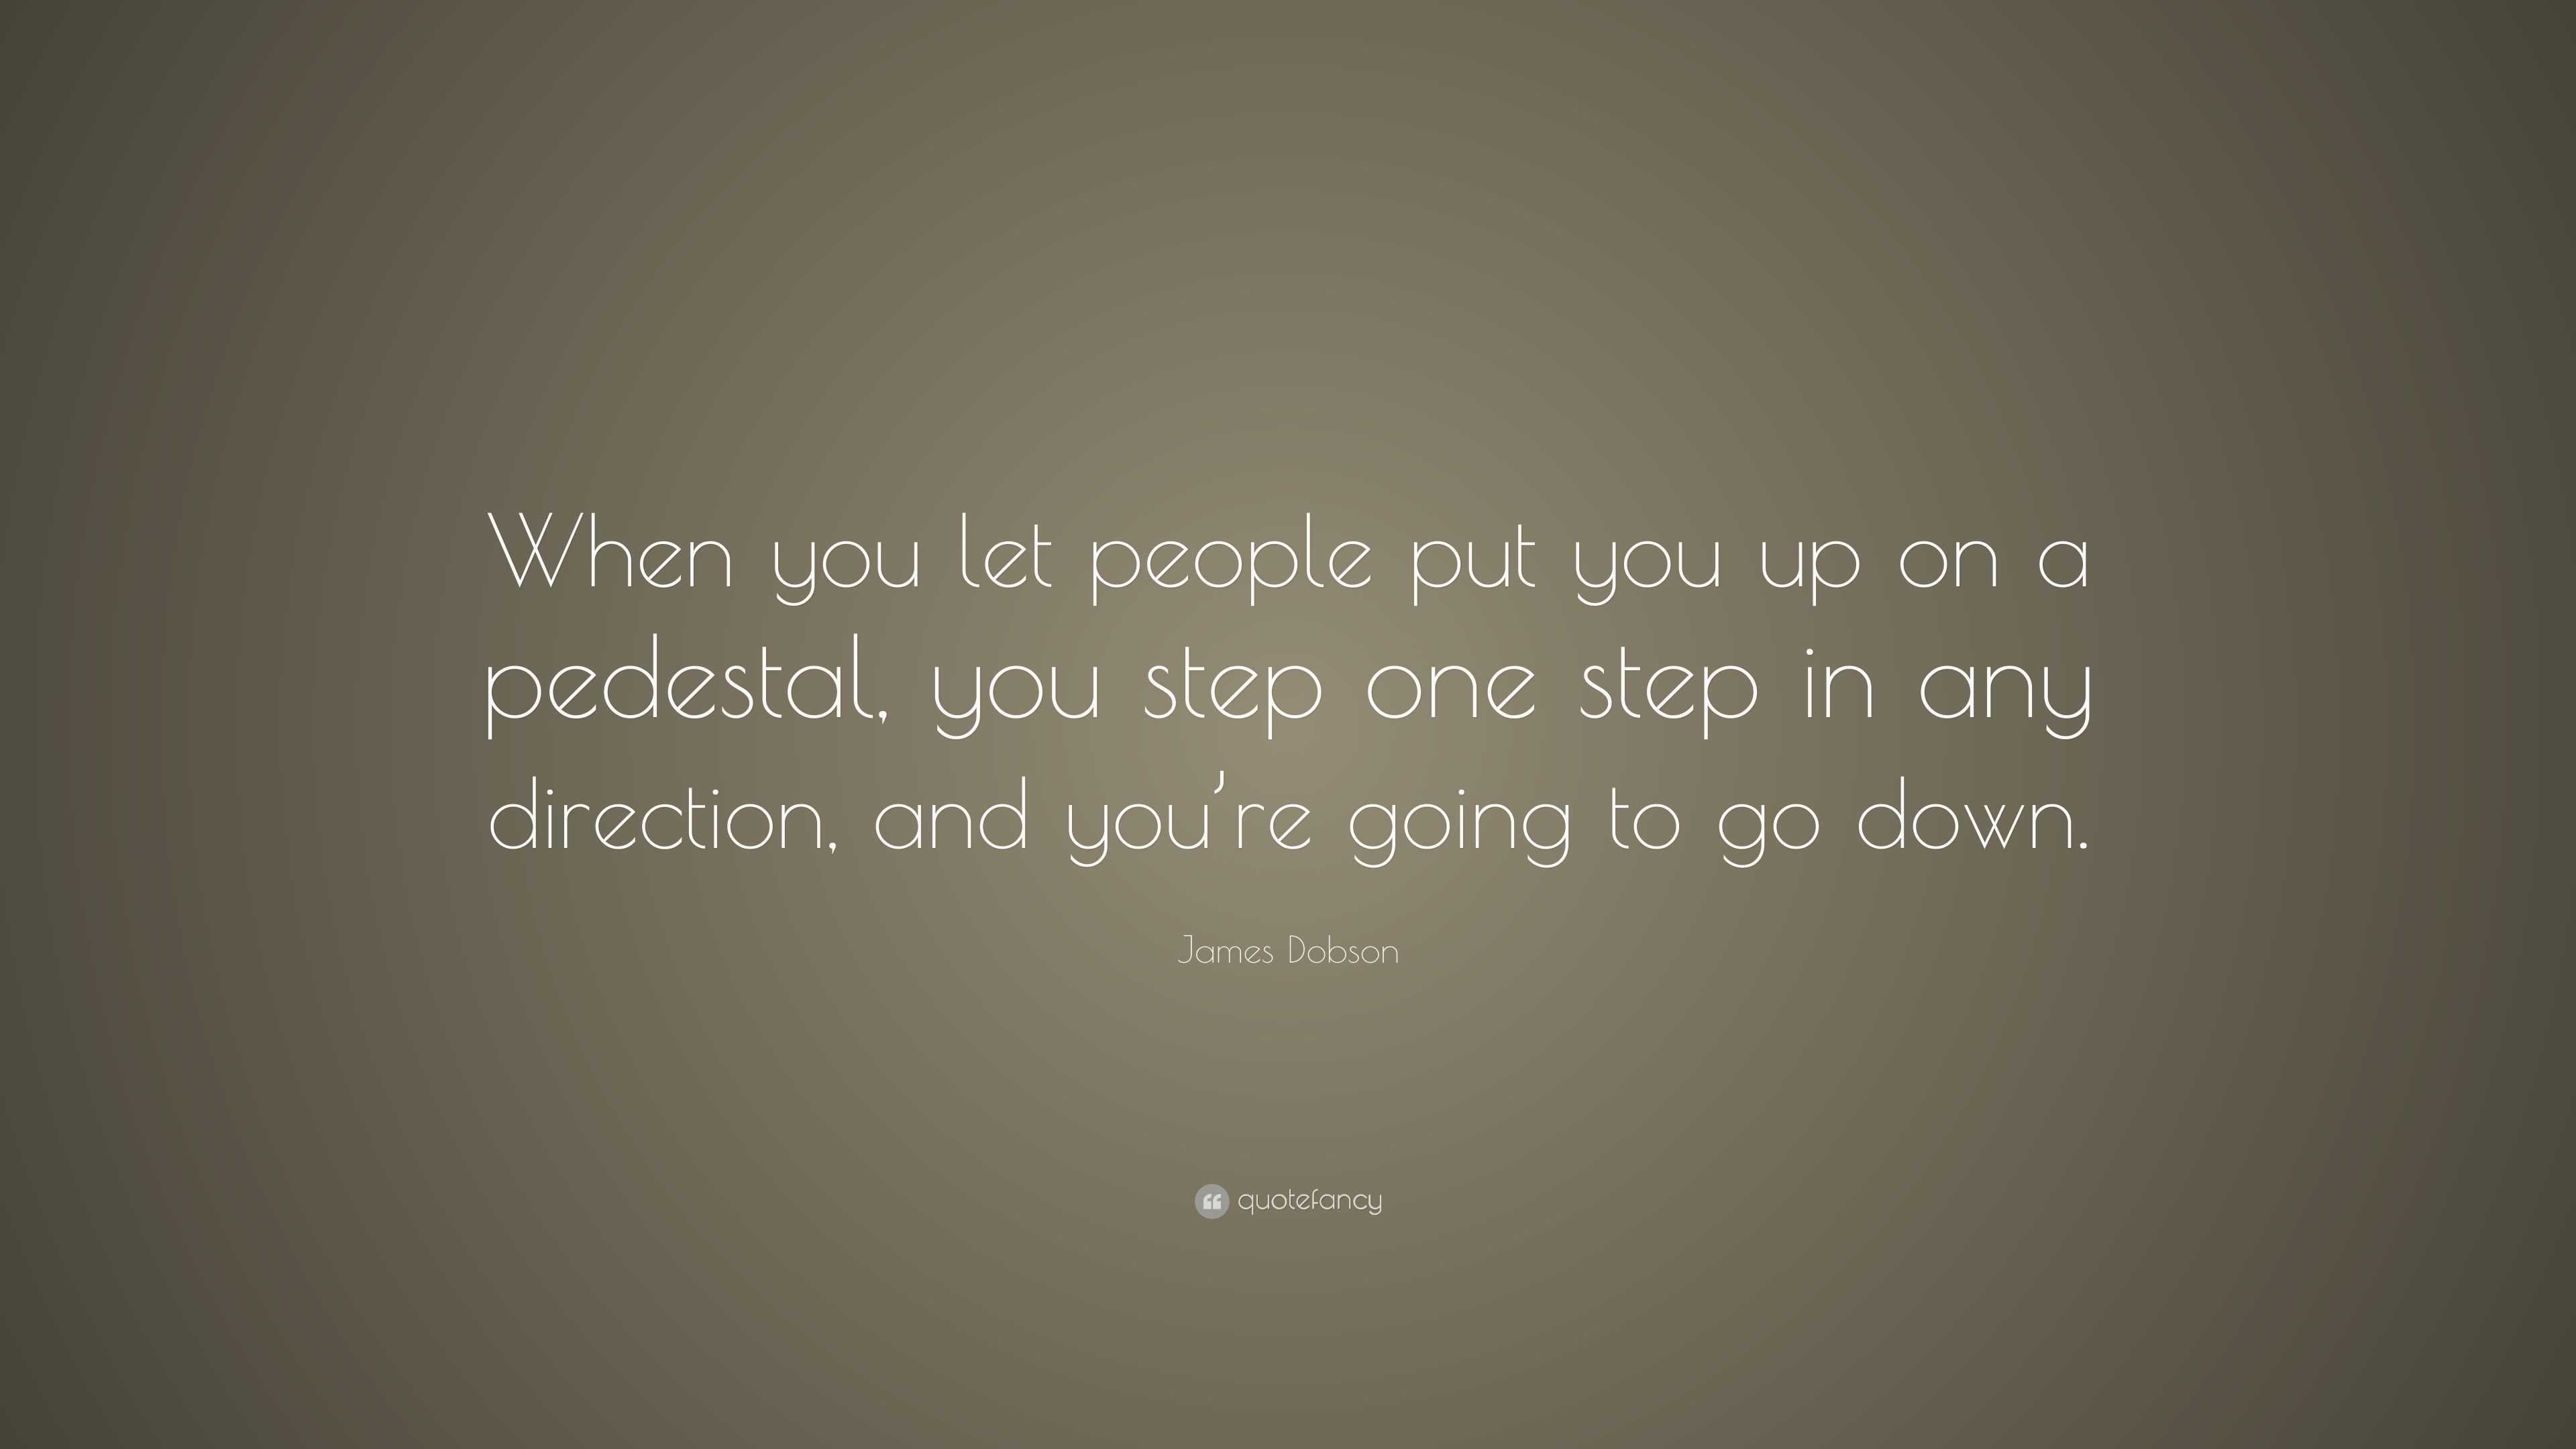 James Dobson Quote: “When you let people put you up on a pedestal, you ...